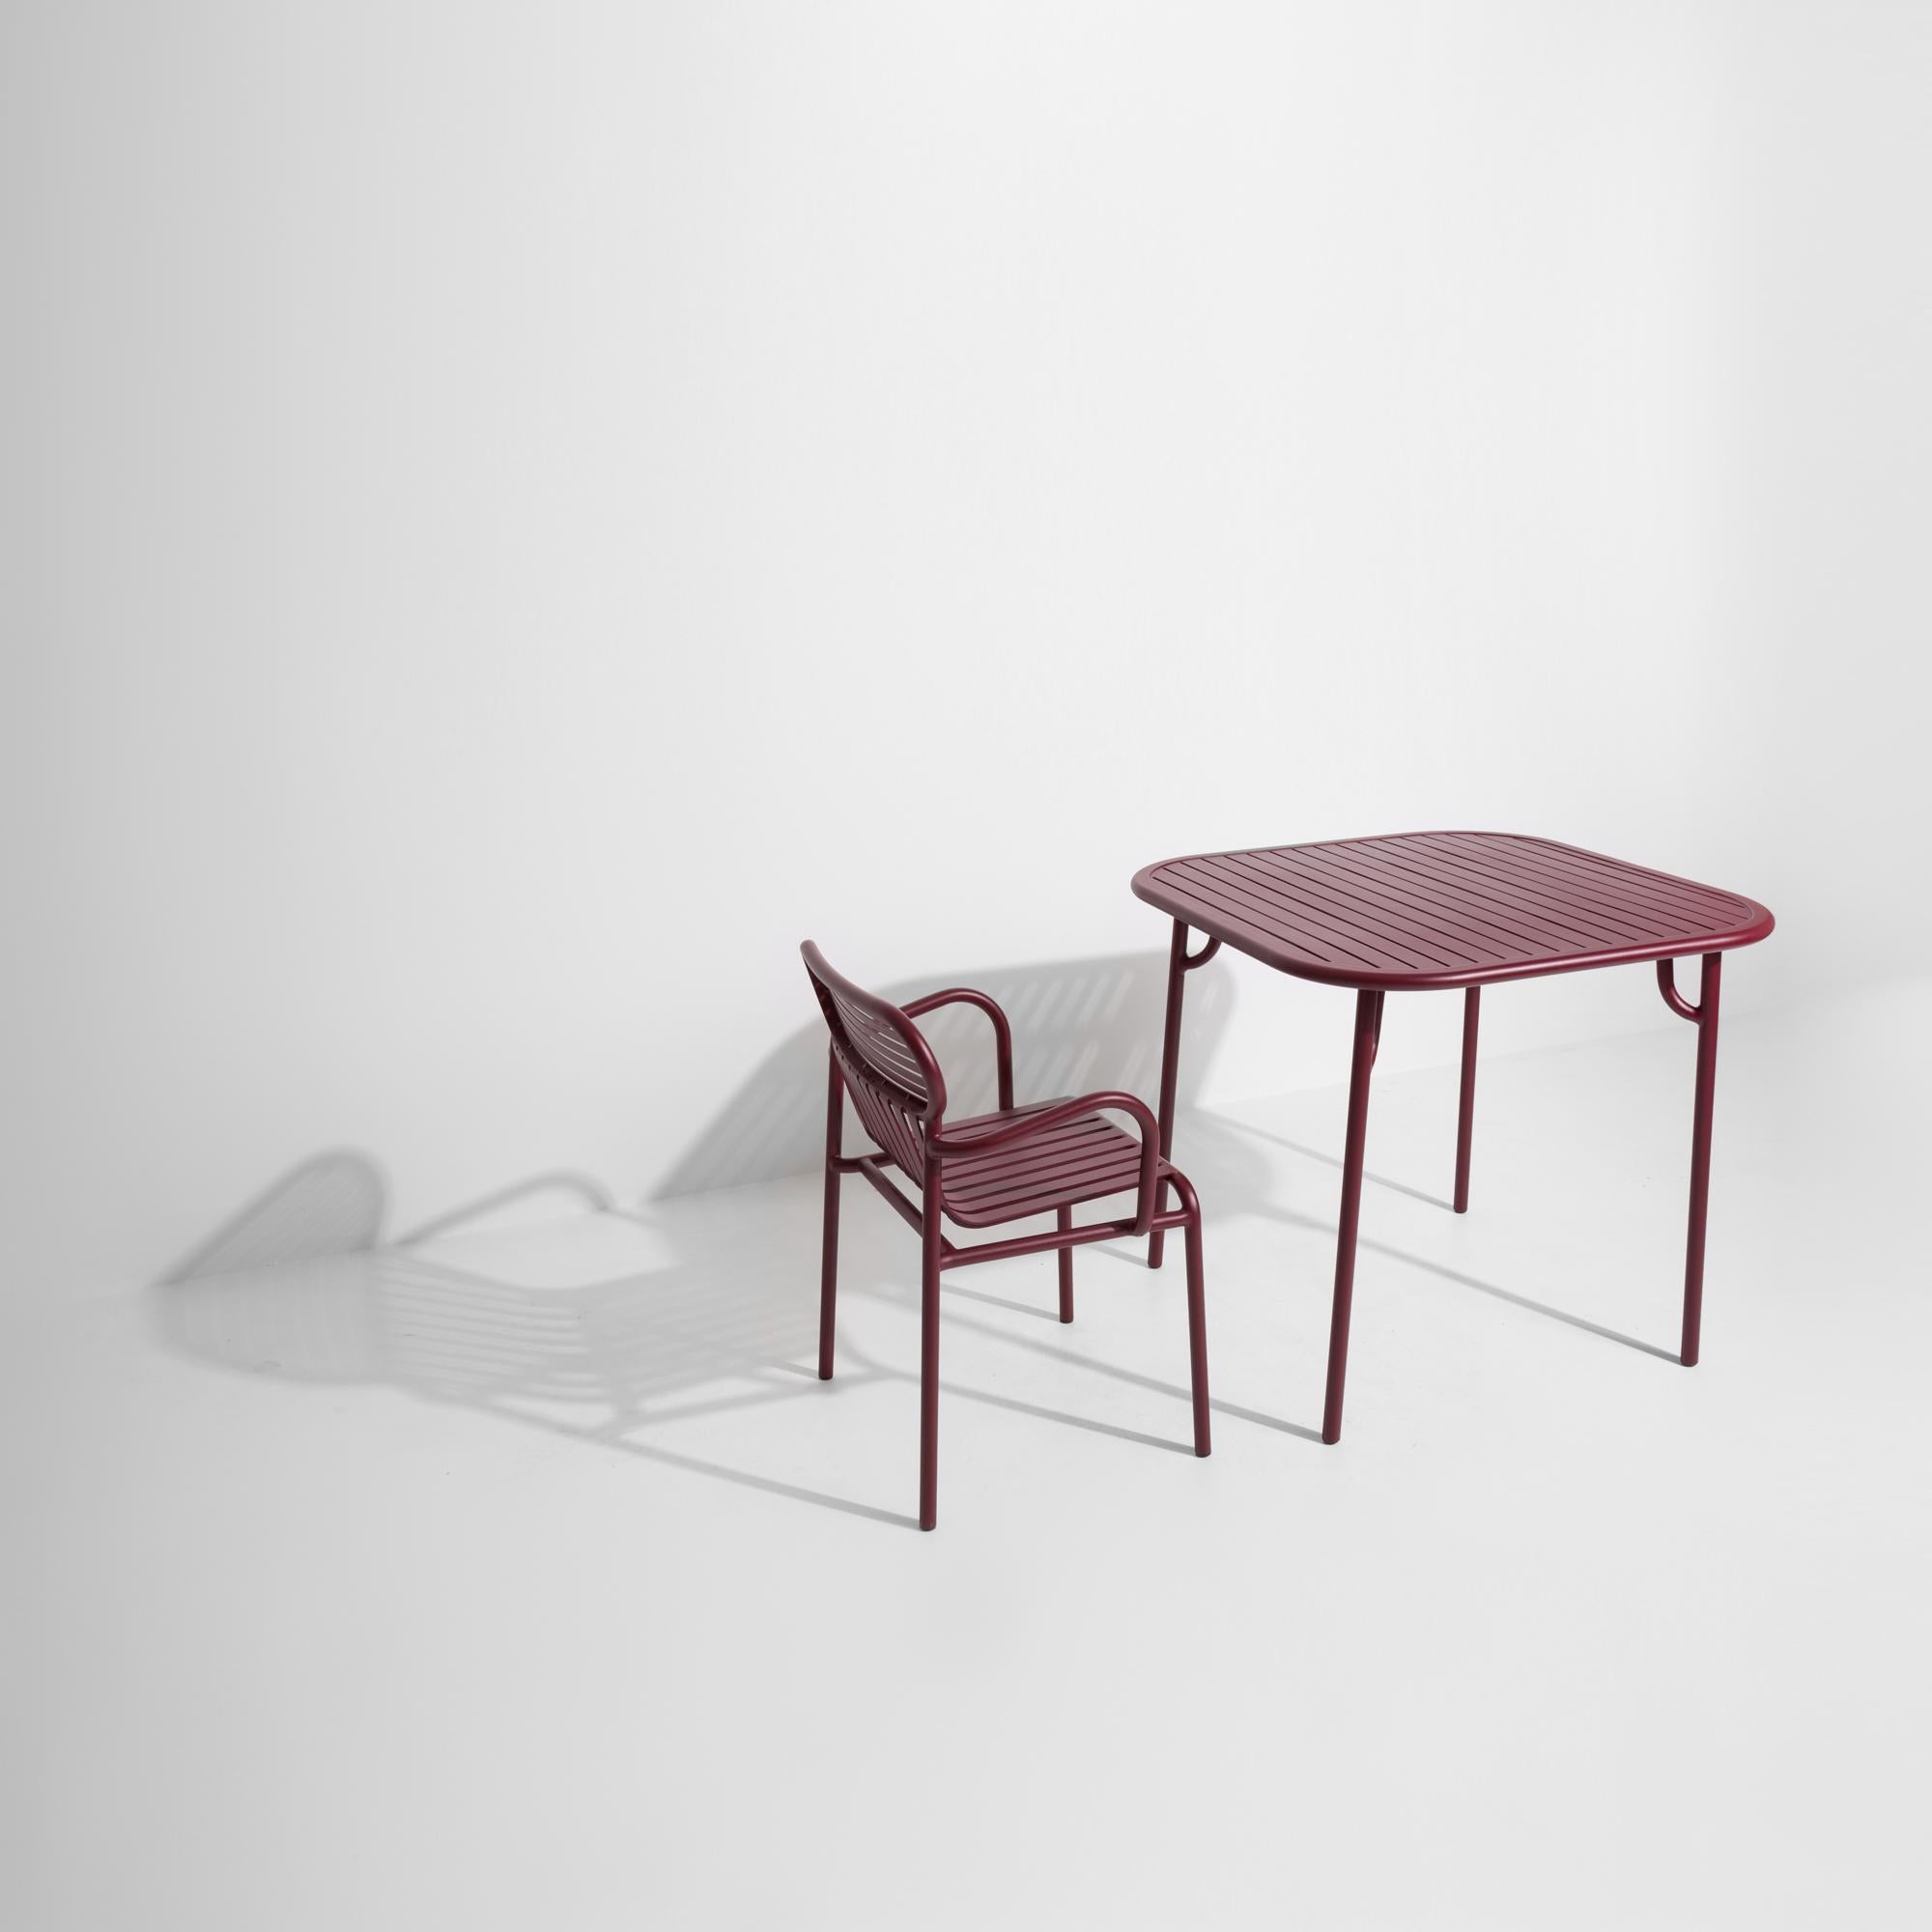 Contemporary Petite Friture Week-End Square Dining Table in Burgundy Aluminium with Slats For Sale